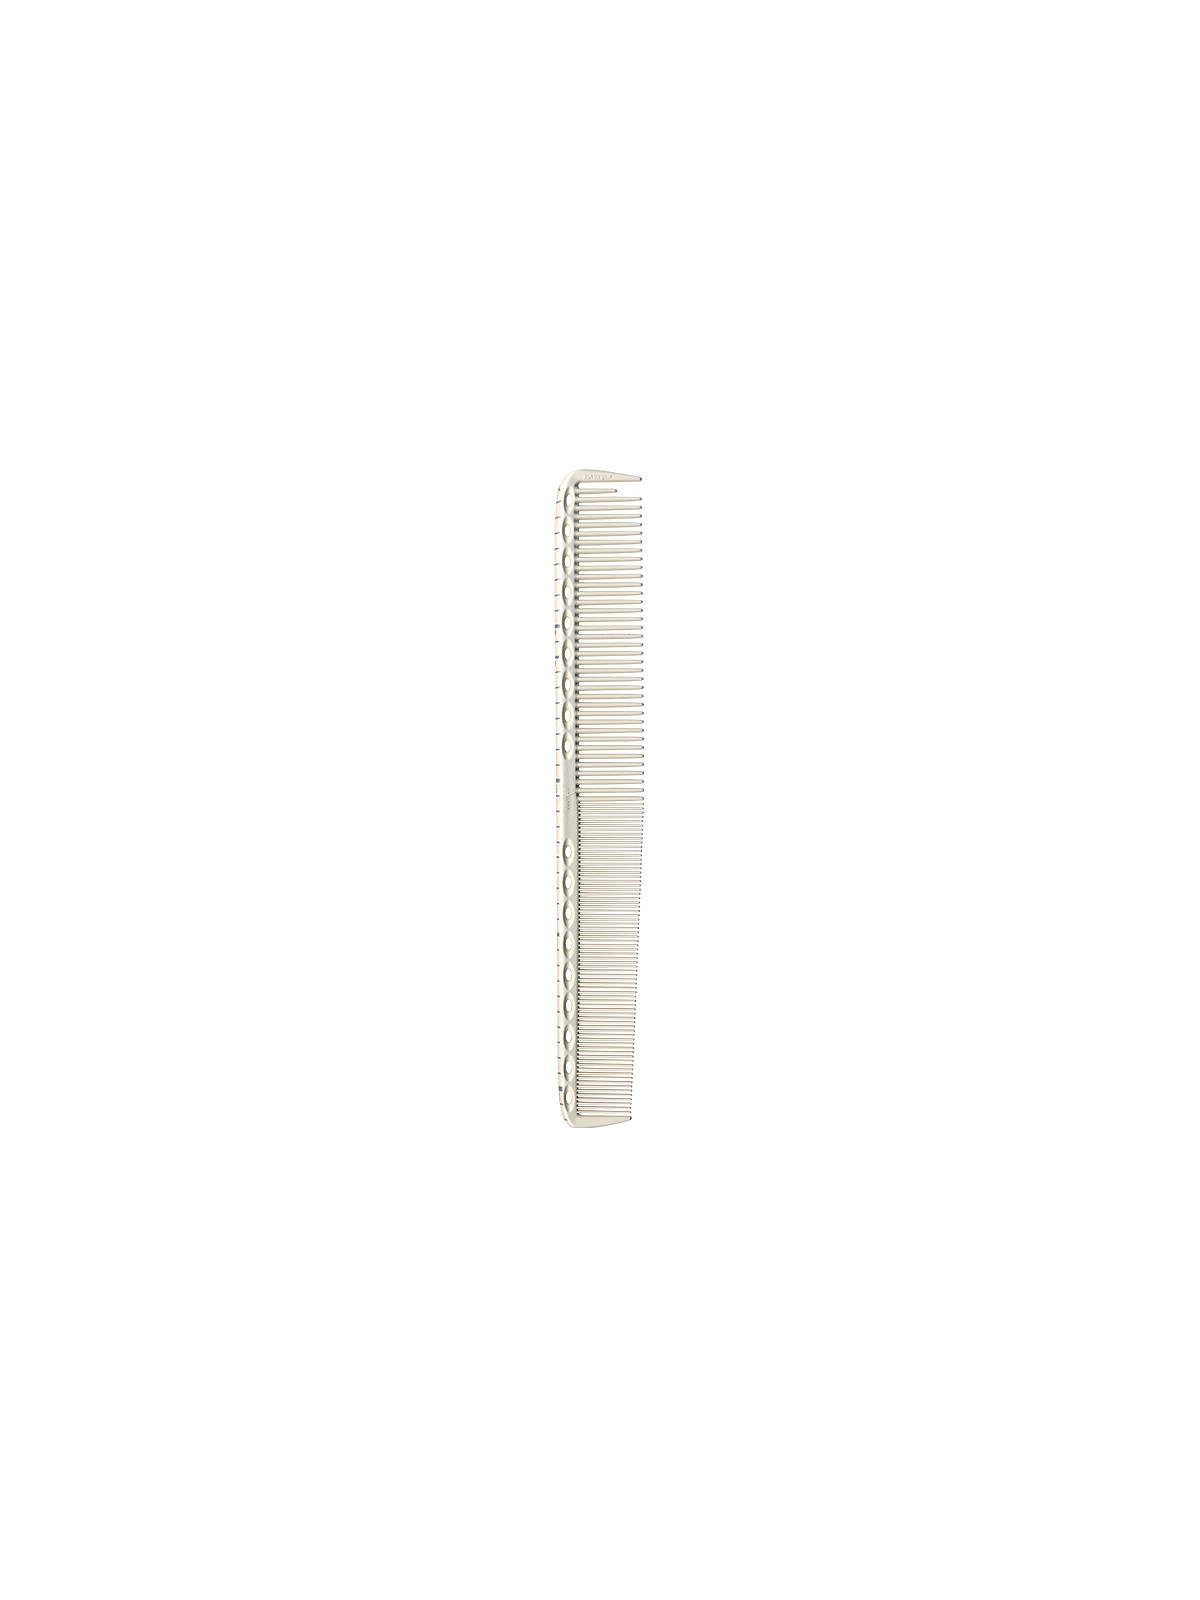 Y.S. Park G35 Cutting Comb with Guide 215mm